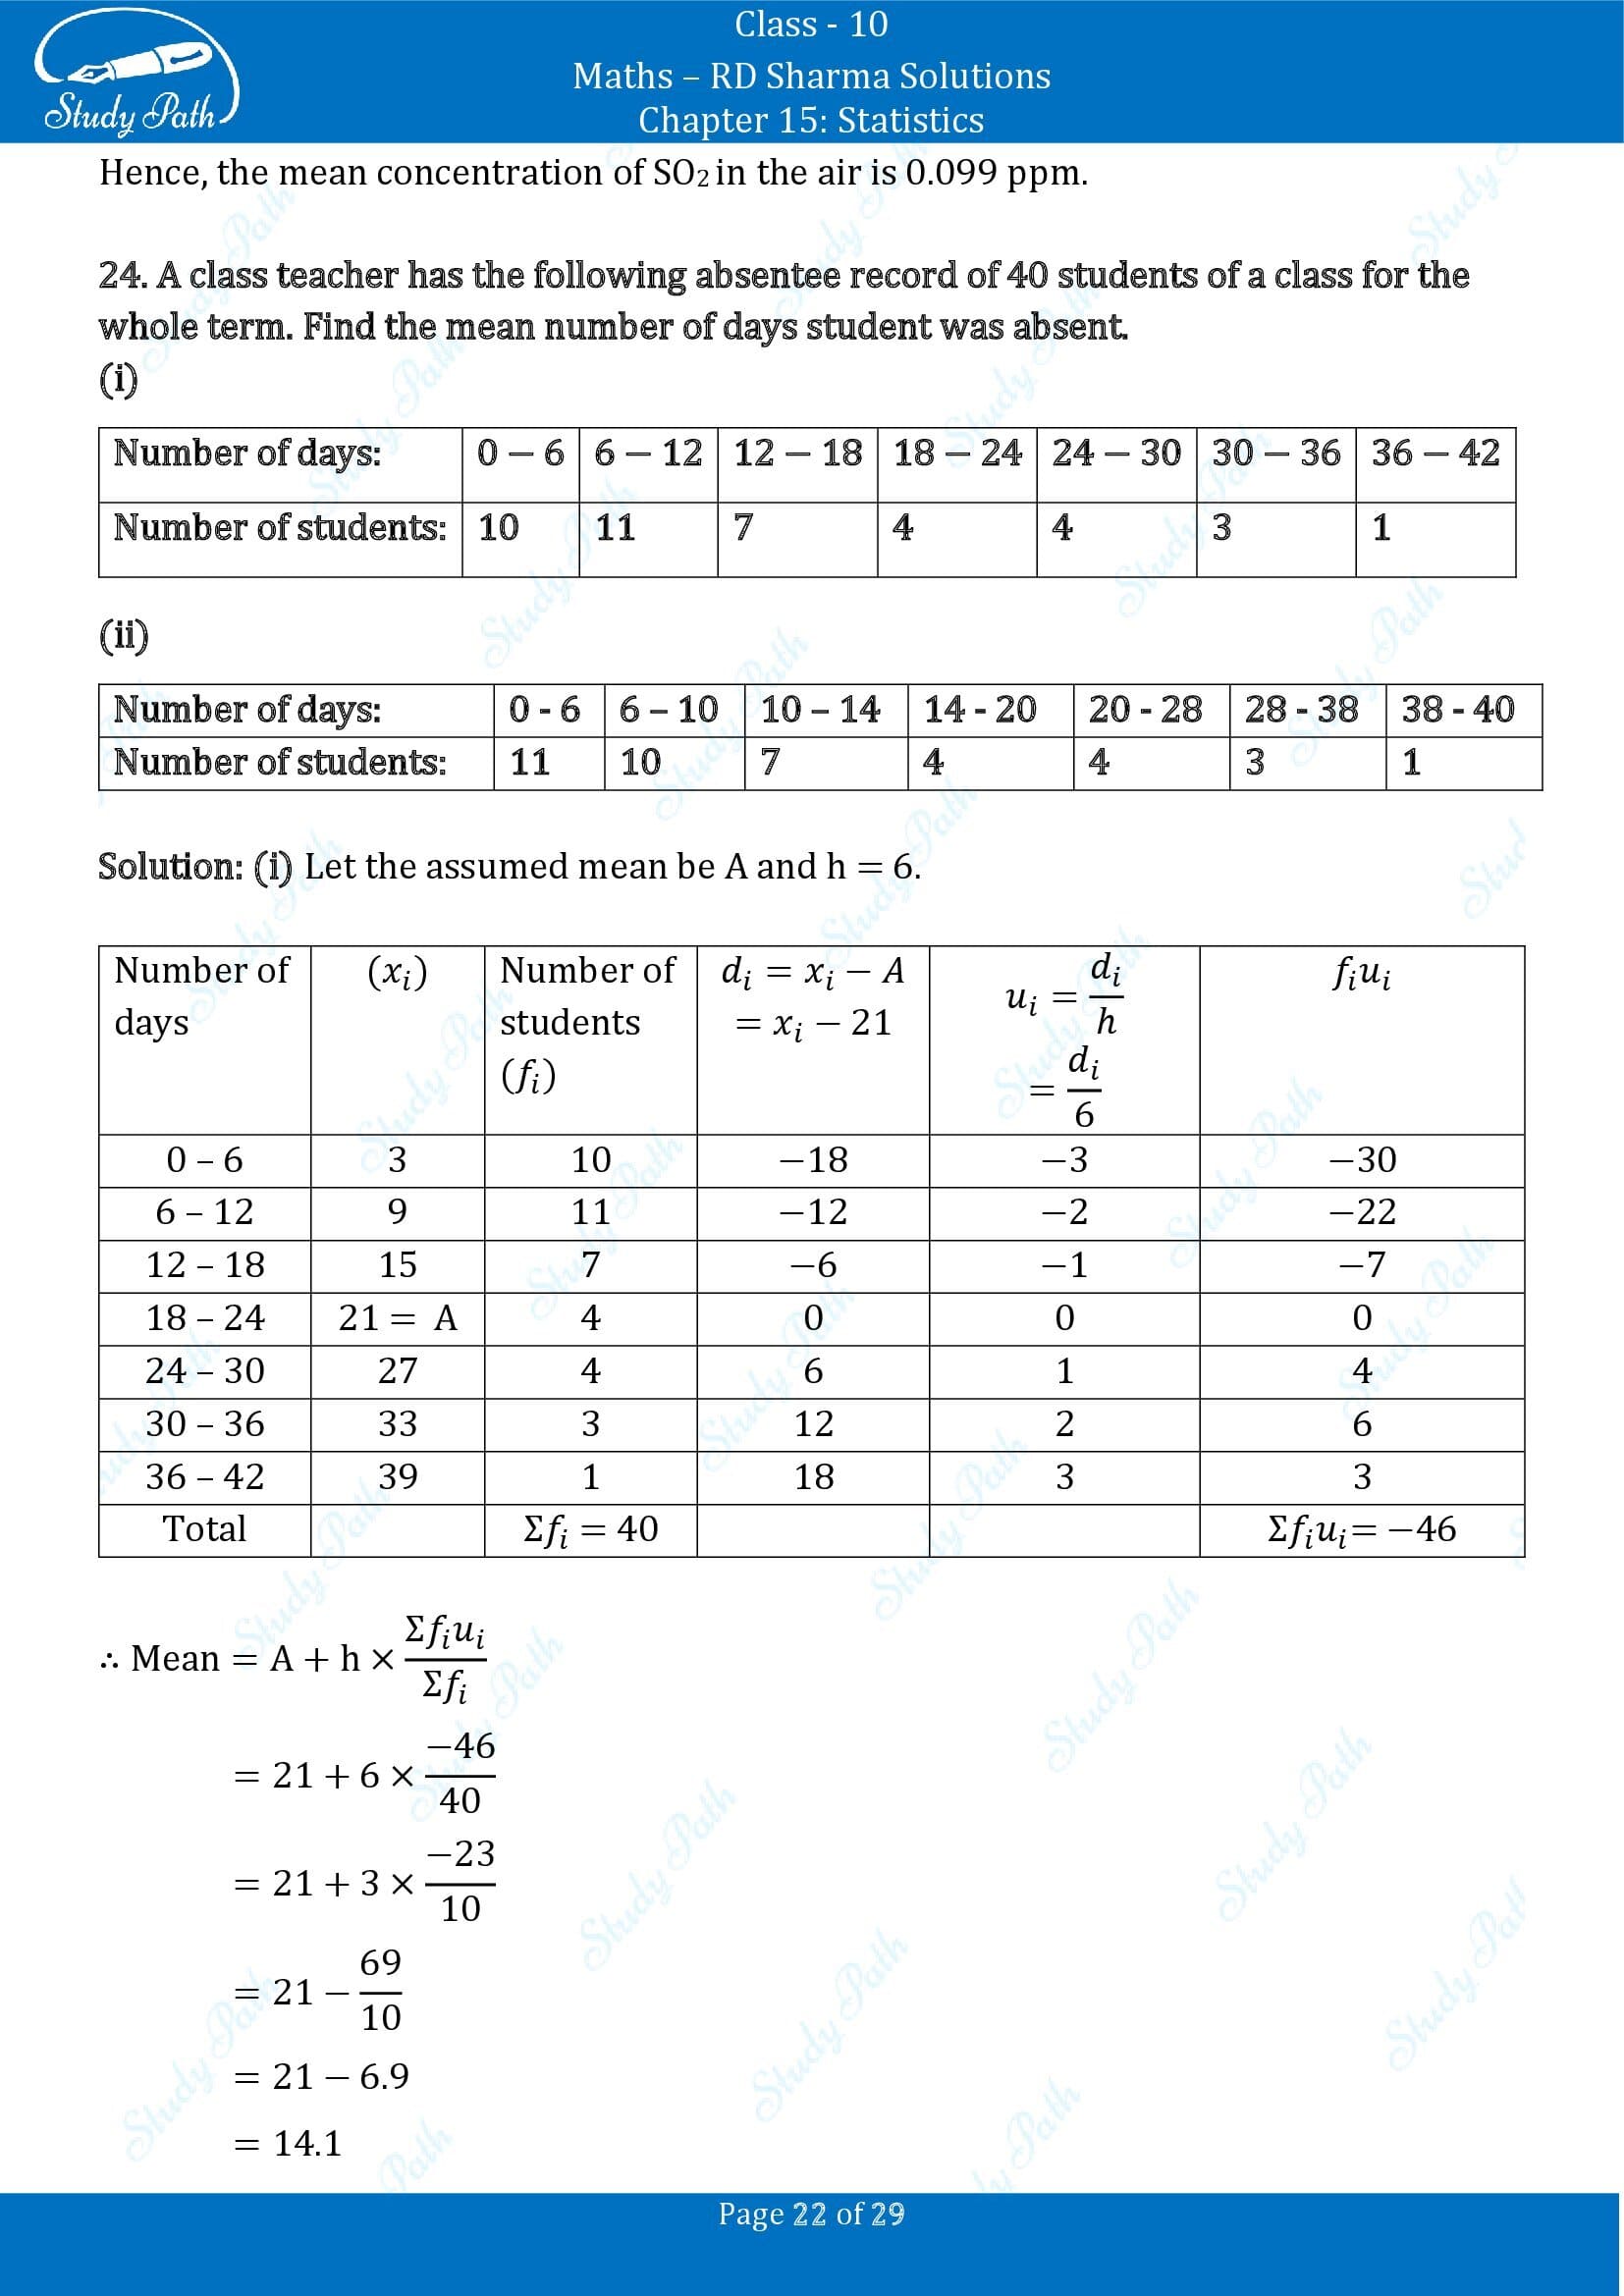 RD Sharma Solutions Class 10 Chapter 15 Statistics Exercise 15.3 0022